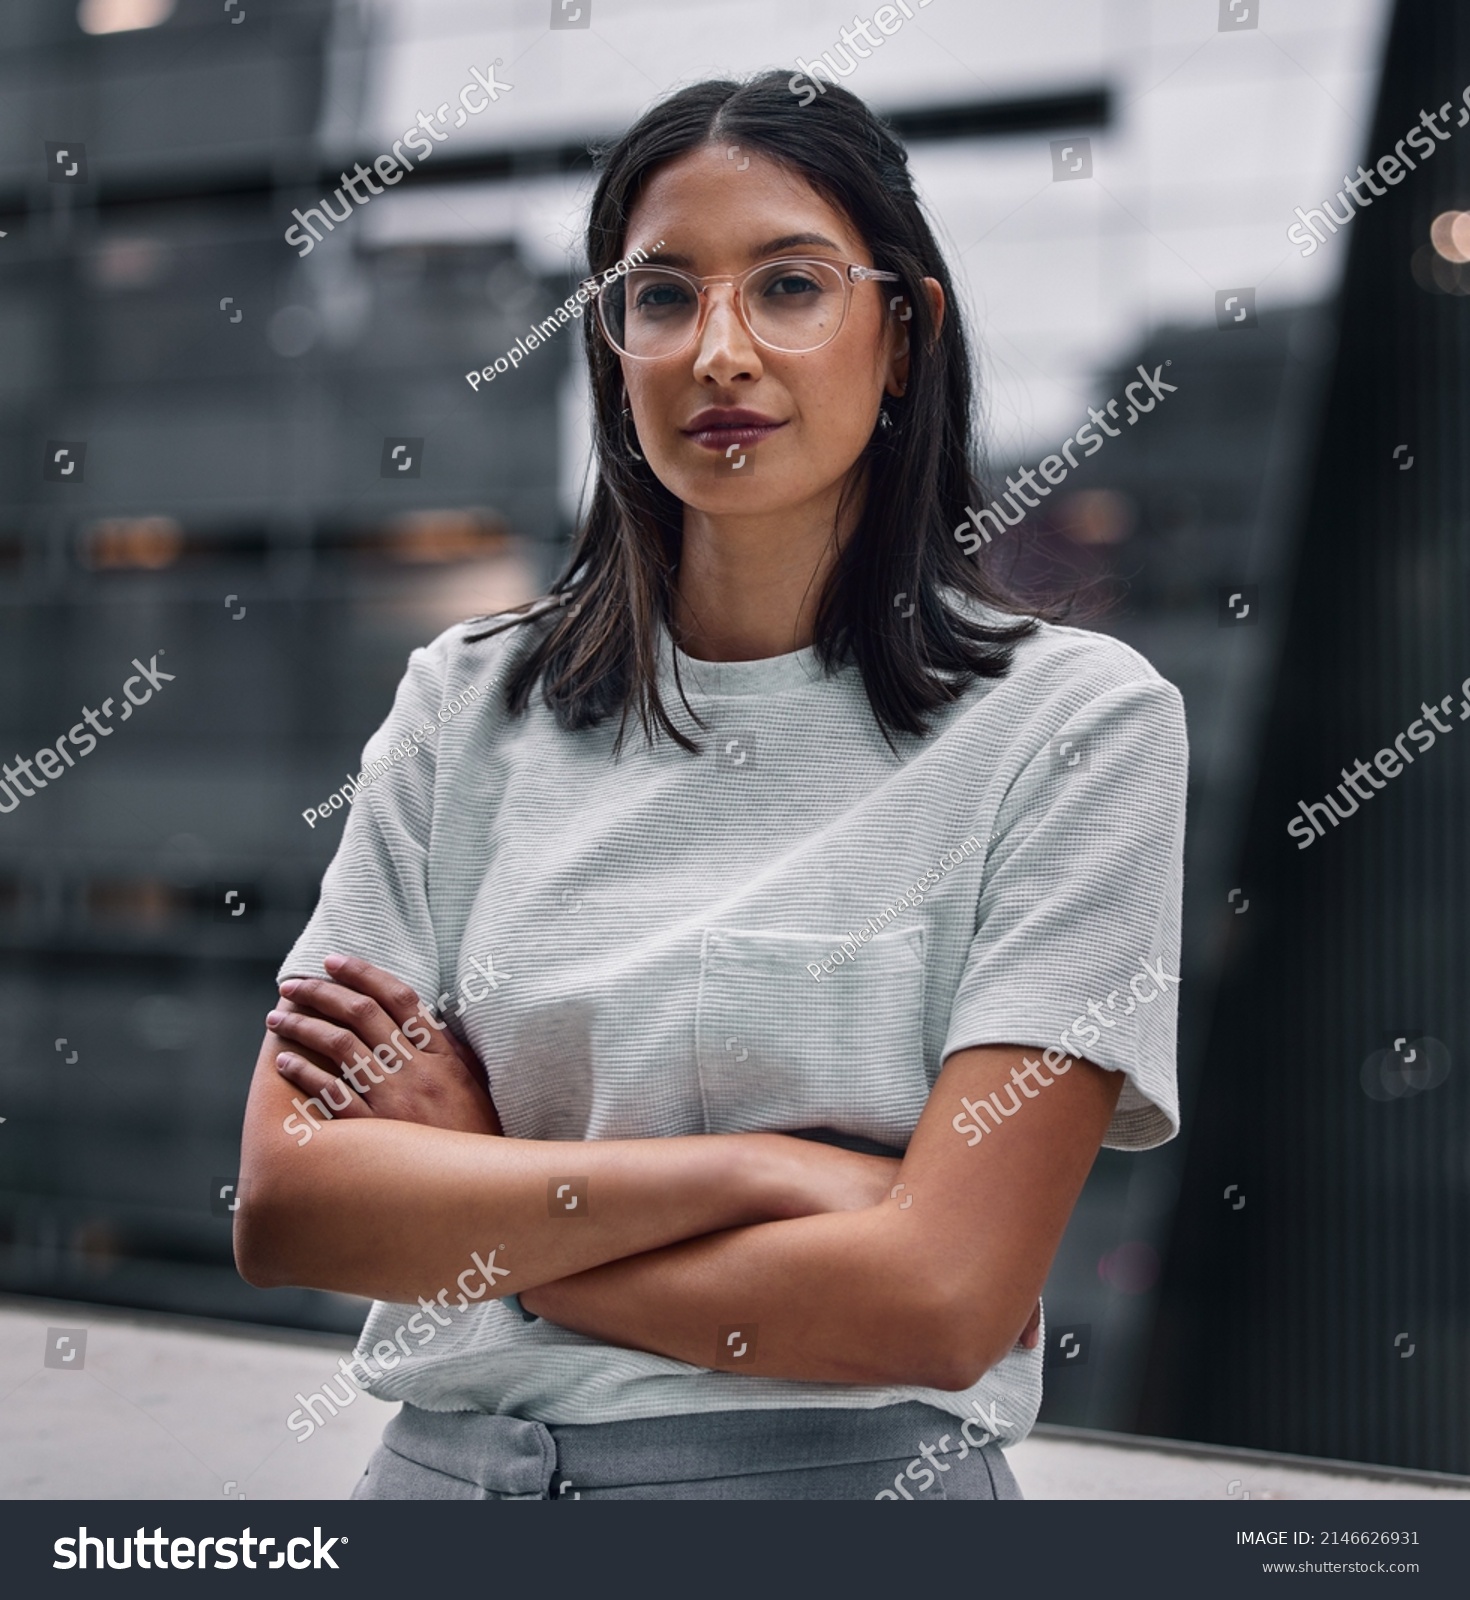 Determined to make it no matter the cost. Shot of an attractive young businesswoman standing alone in the office with her arms folded during a late shift. #2146626931